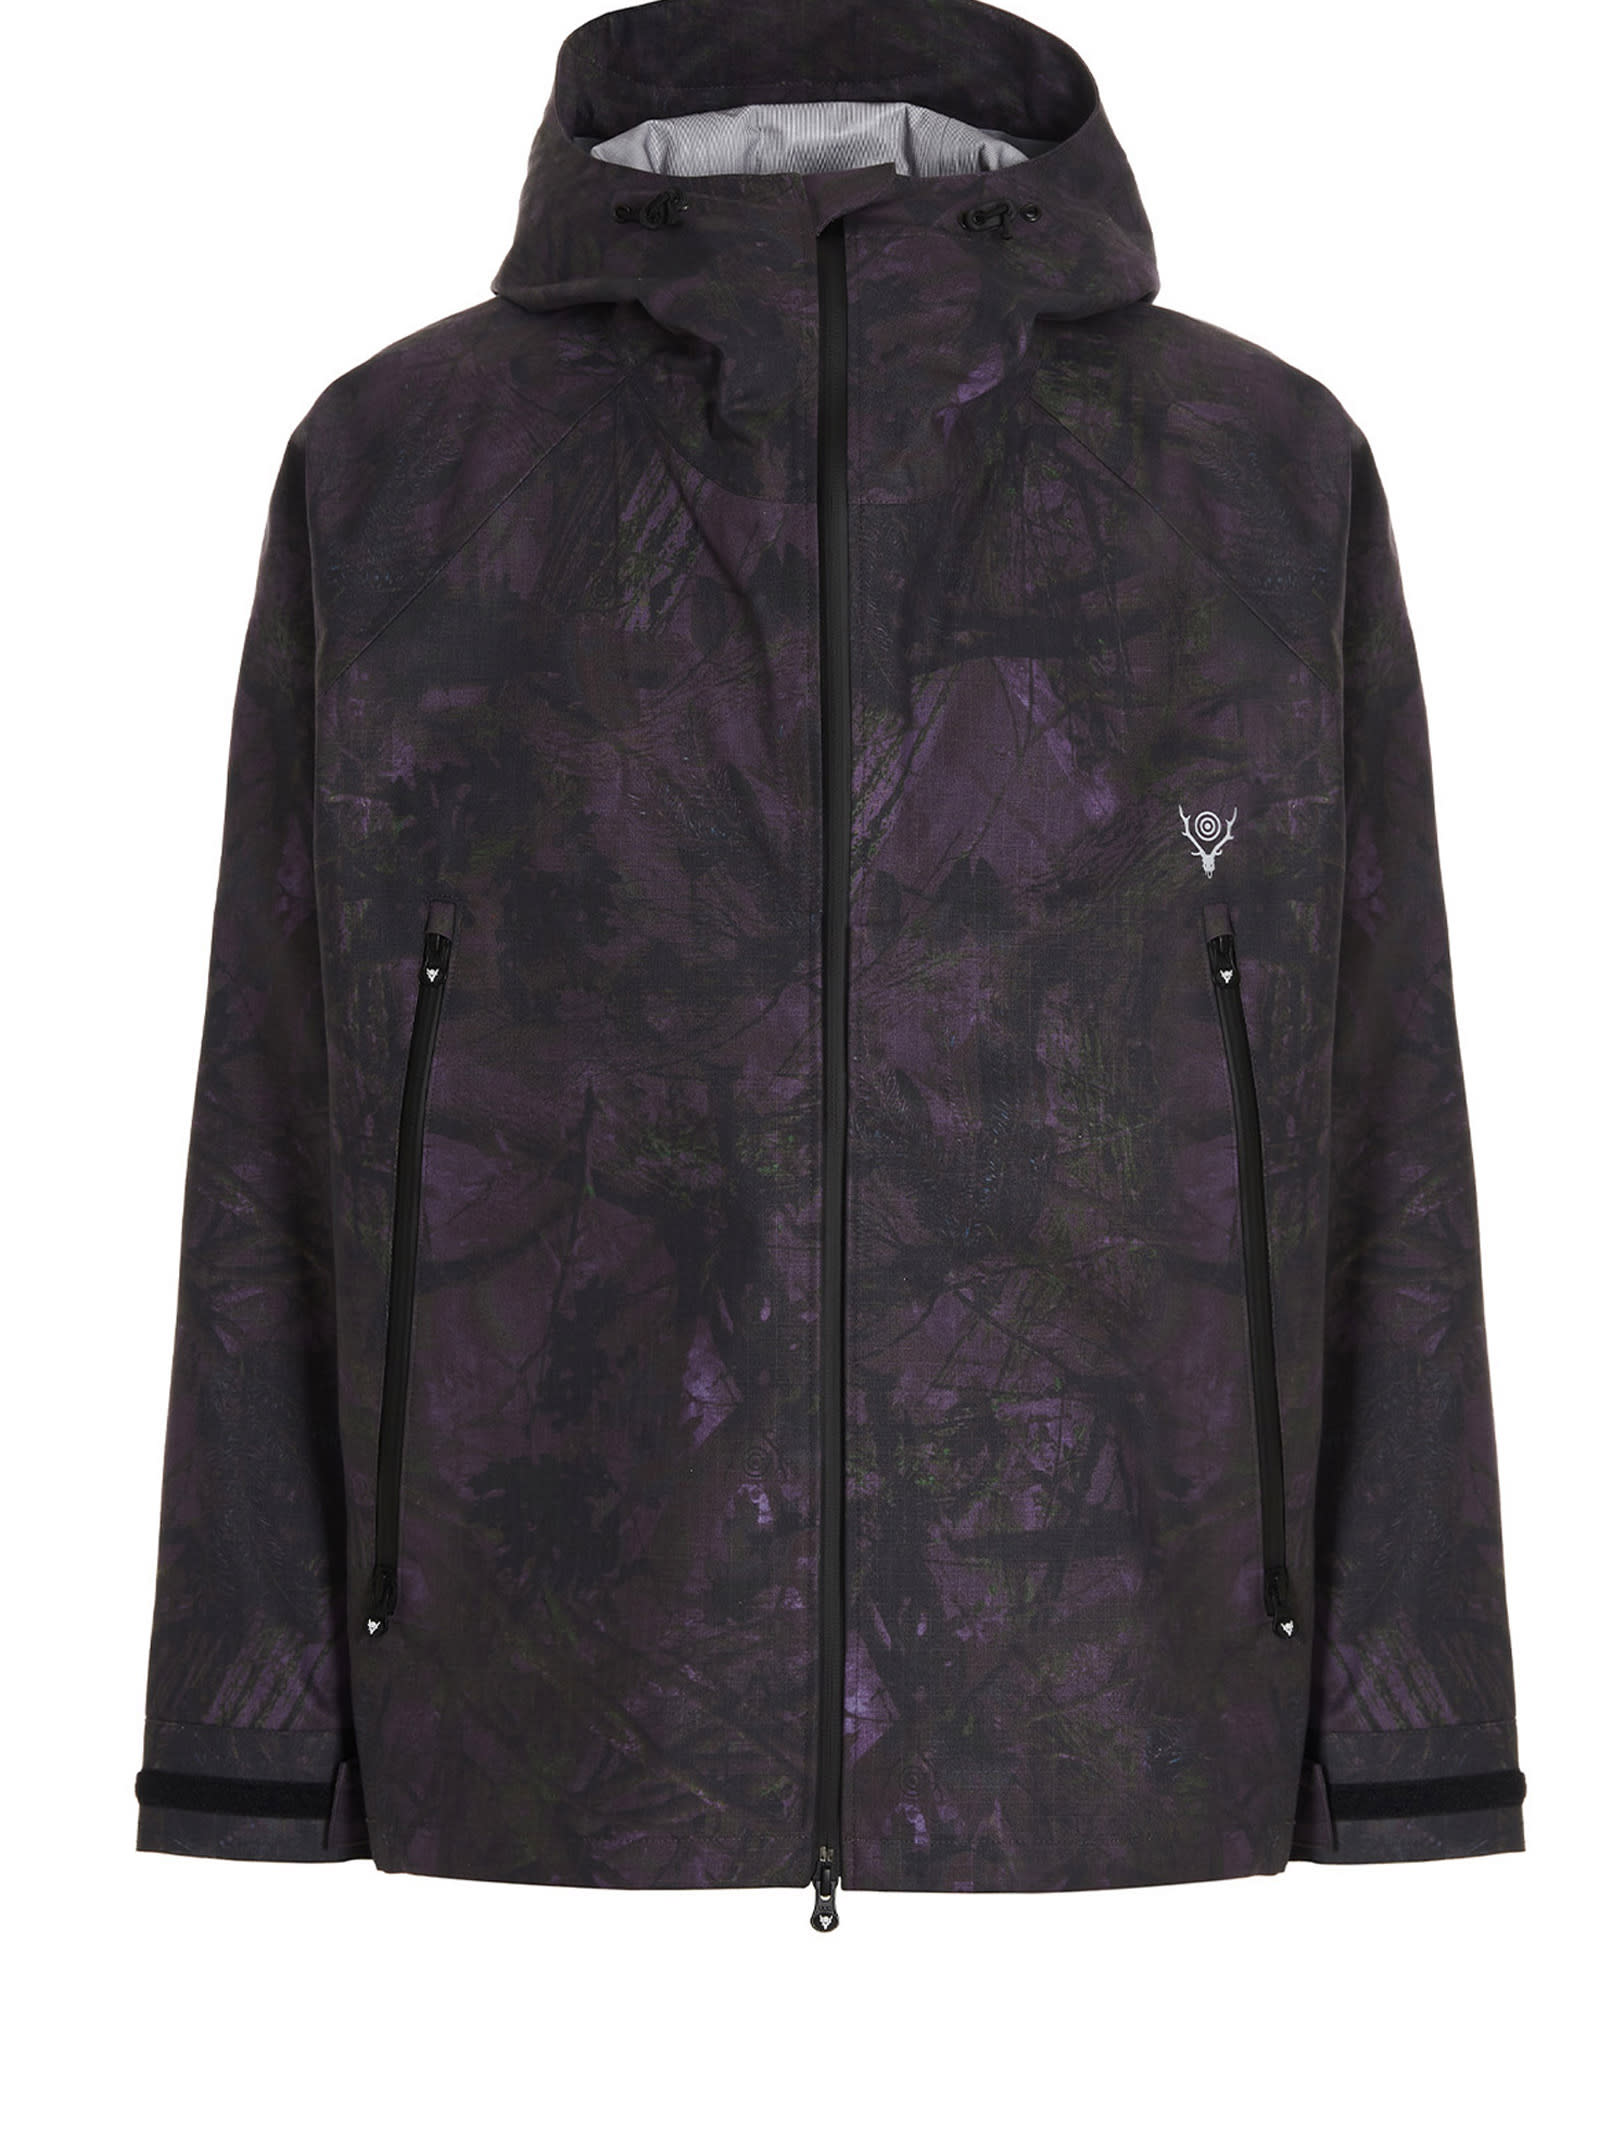 South2 West8 'weather Effect' Jacket | italist